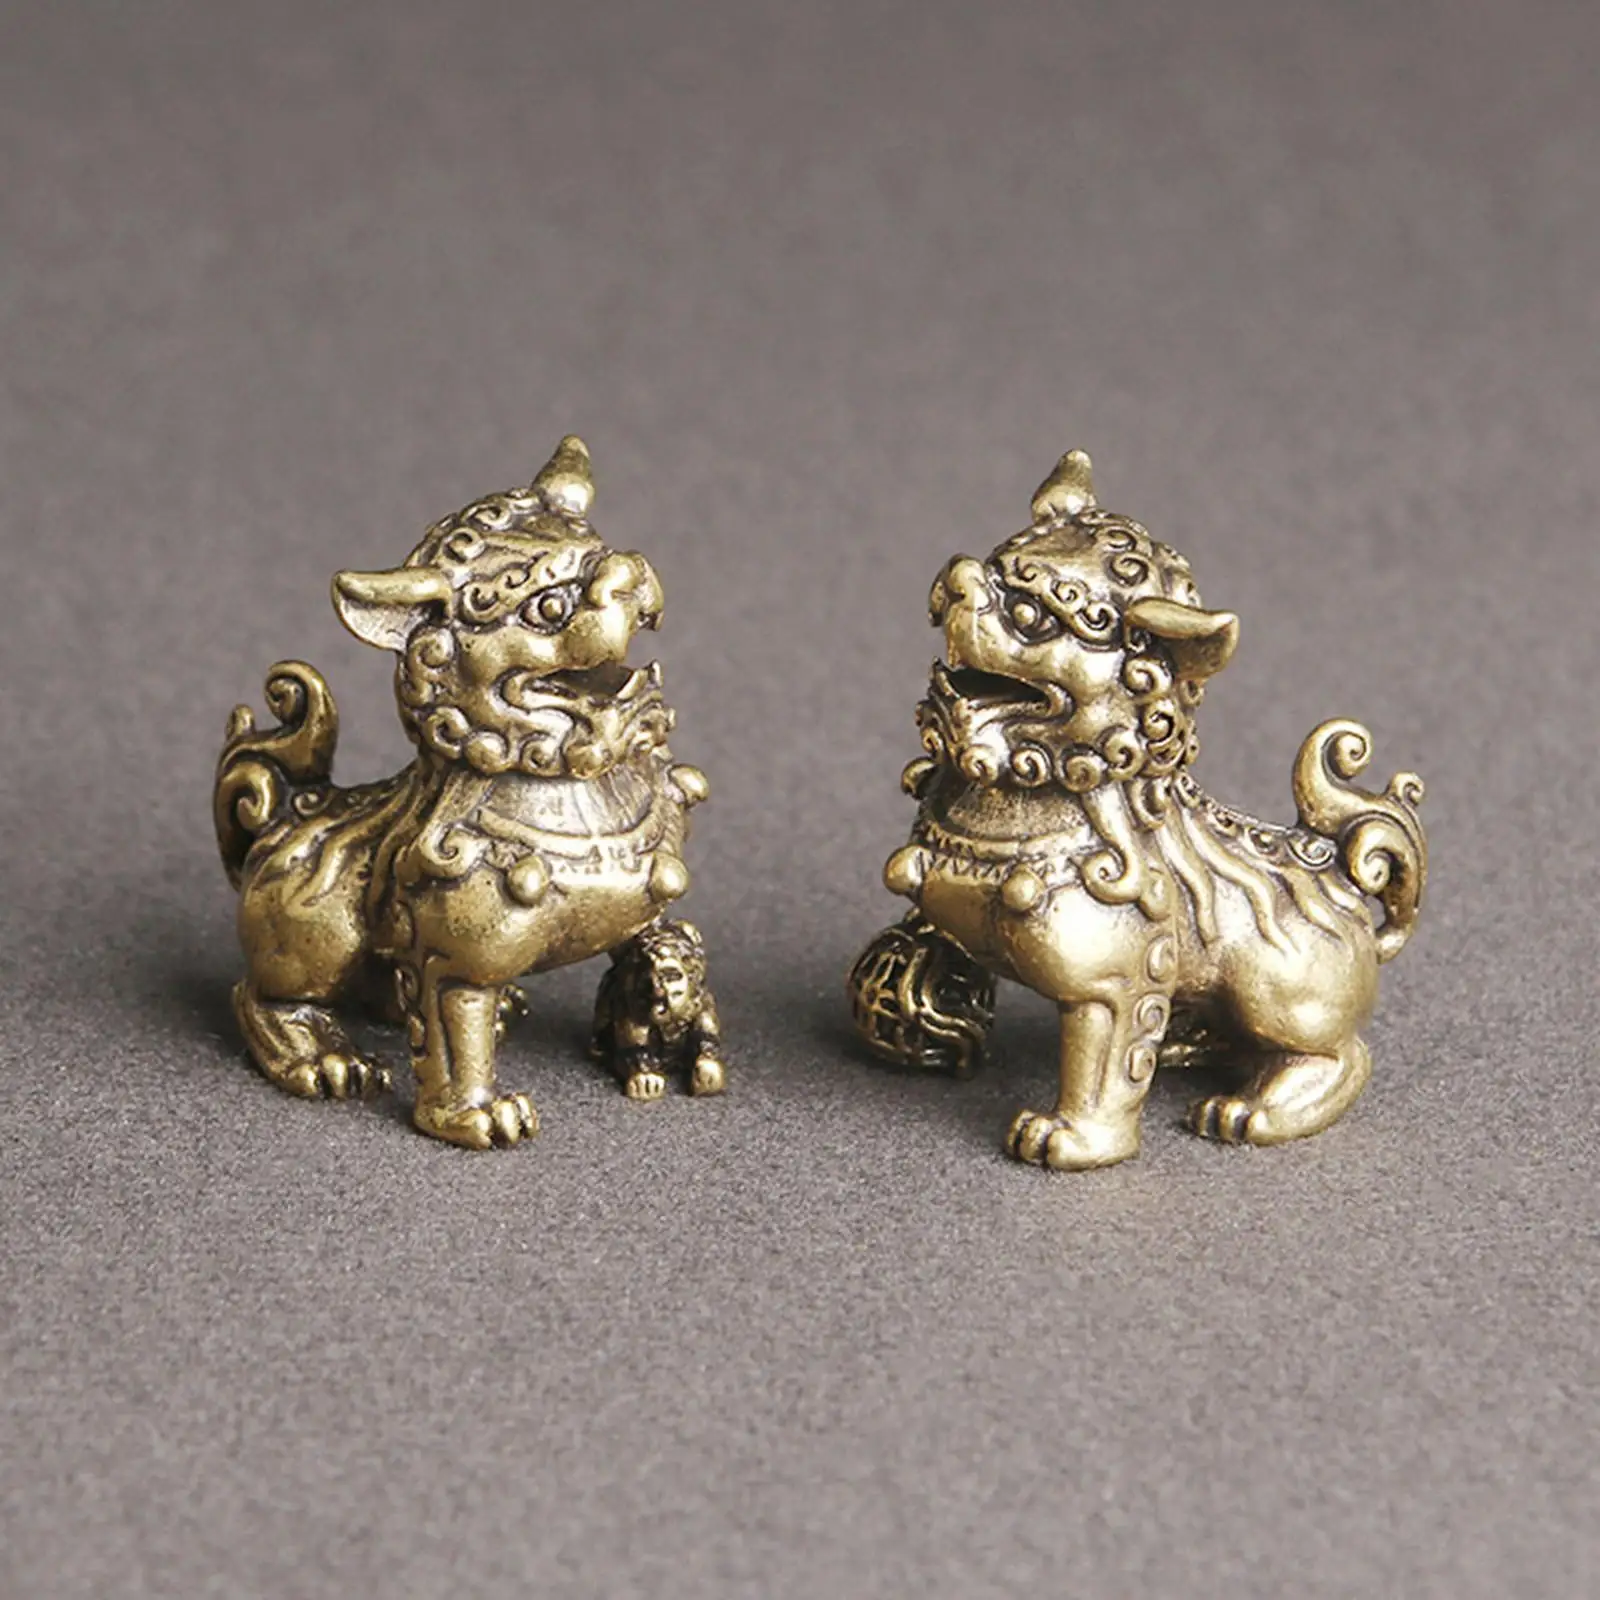 Gold Lion Figurine Feng Shui Decor Collectibles Tabletop Crafts Decoration Mini Lion Statue for Home Outdoor